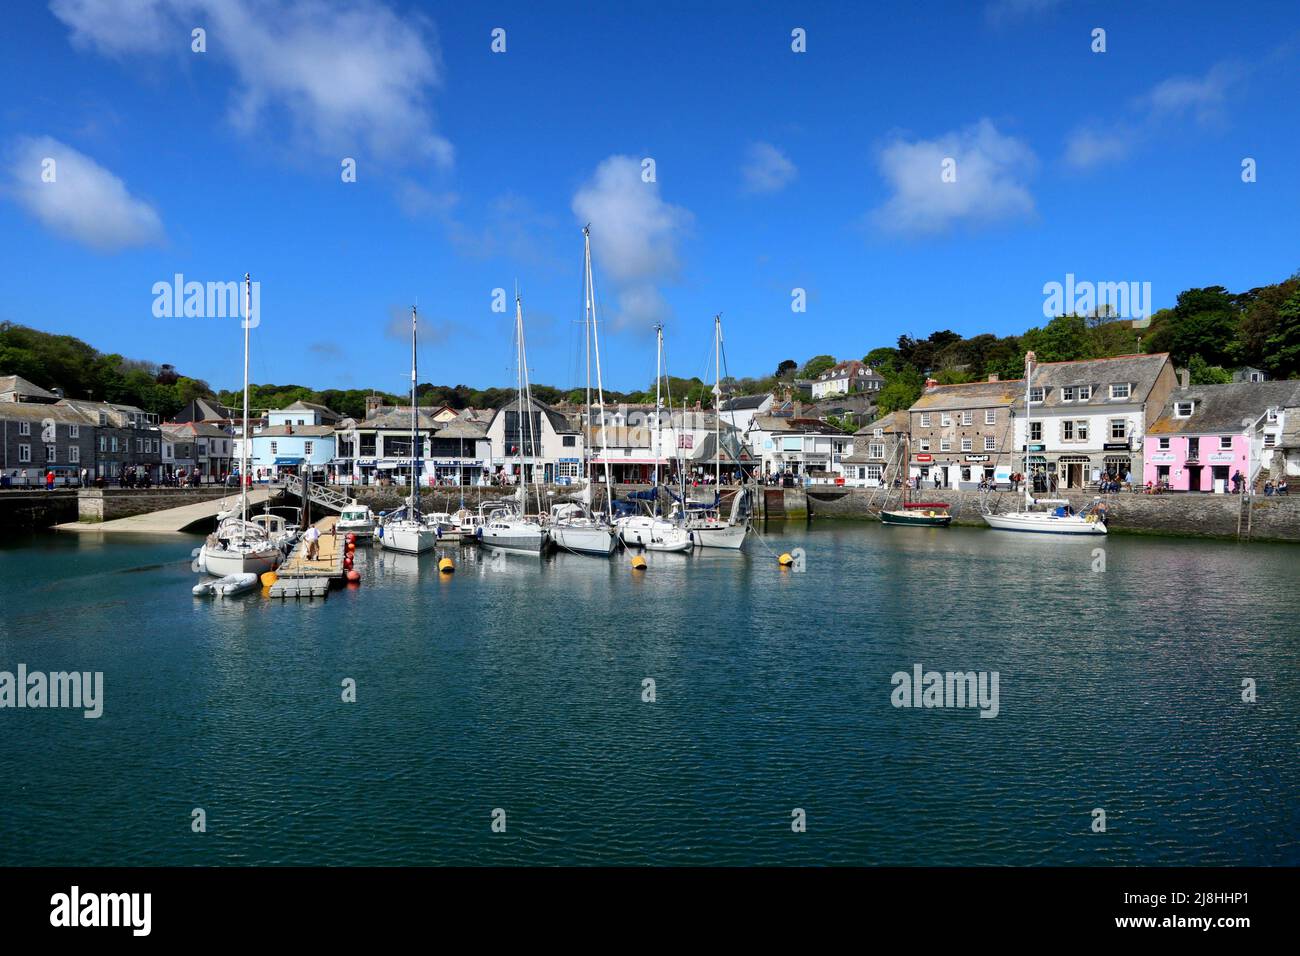 Padstow Harbour looking across the moorings towards North Quay. Stock Photo